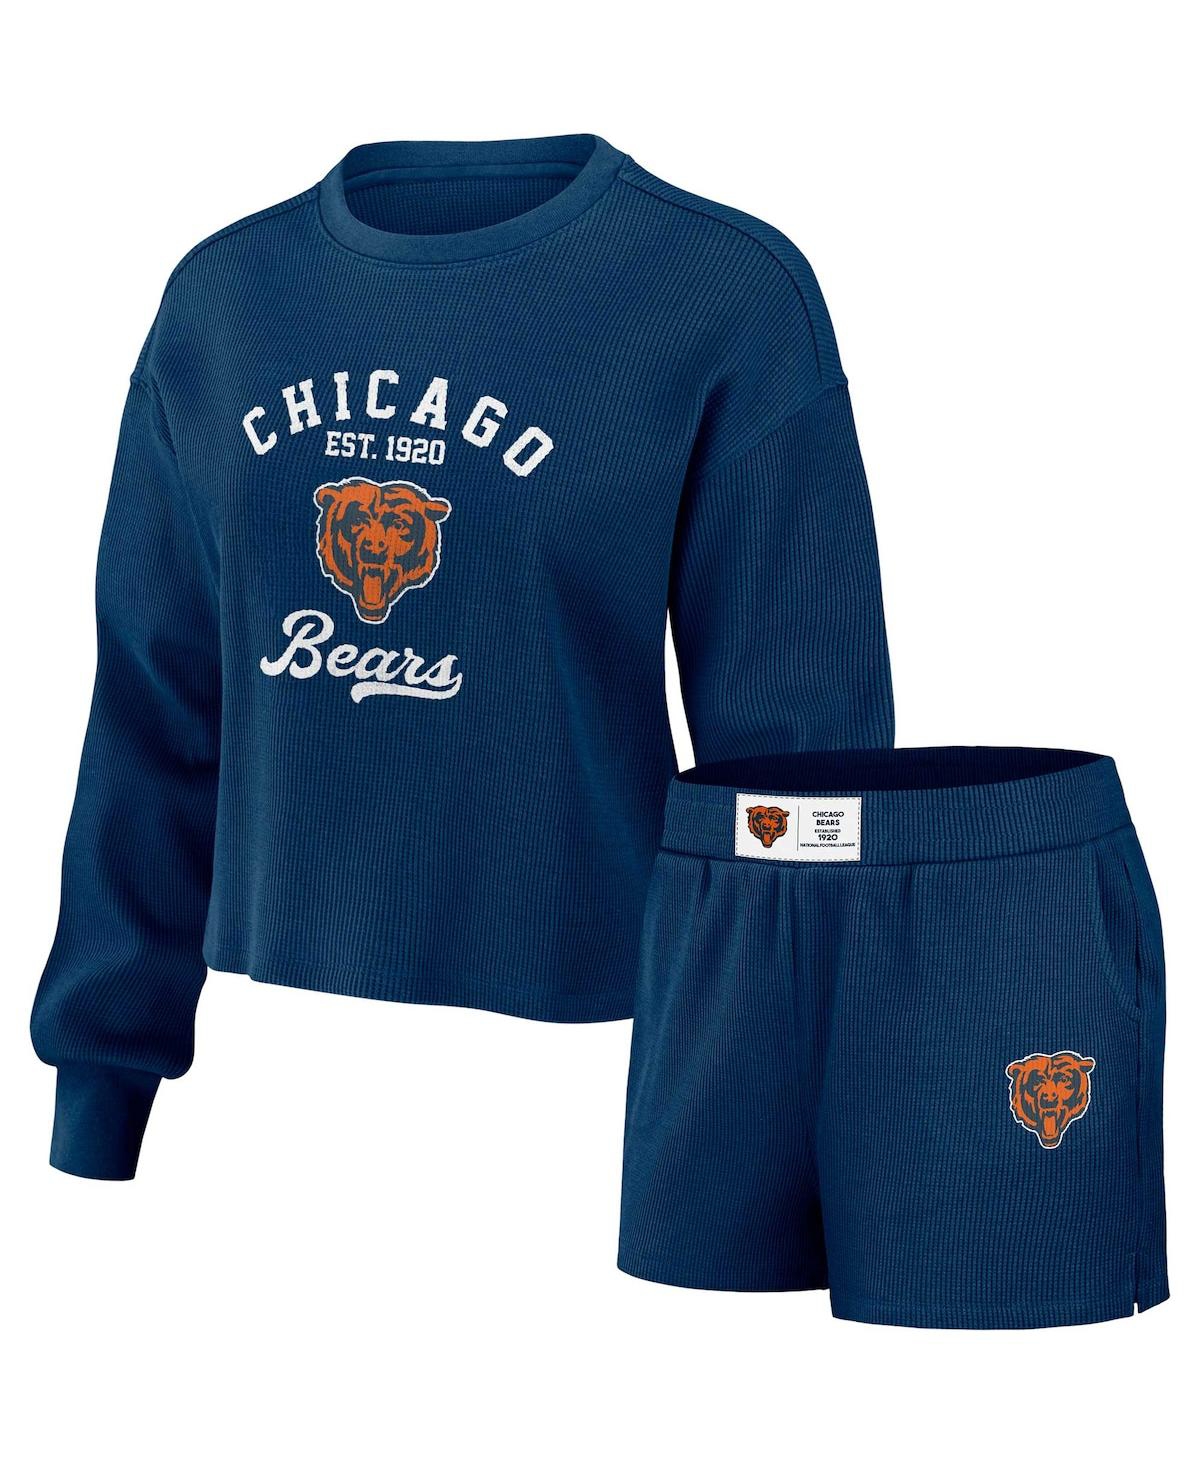 Wear By Erin Andrews Women's  Navy Distressed Chicago Bears Waffle Knit Long Sleeve T-shirt And Short